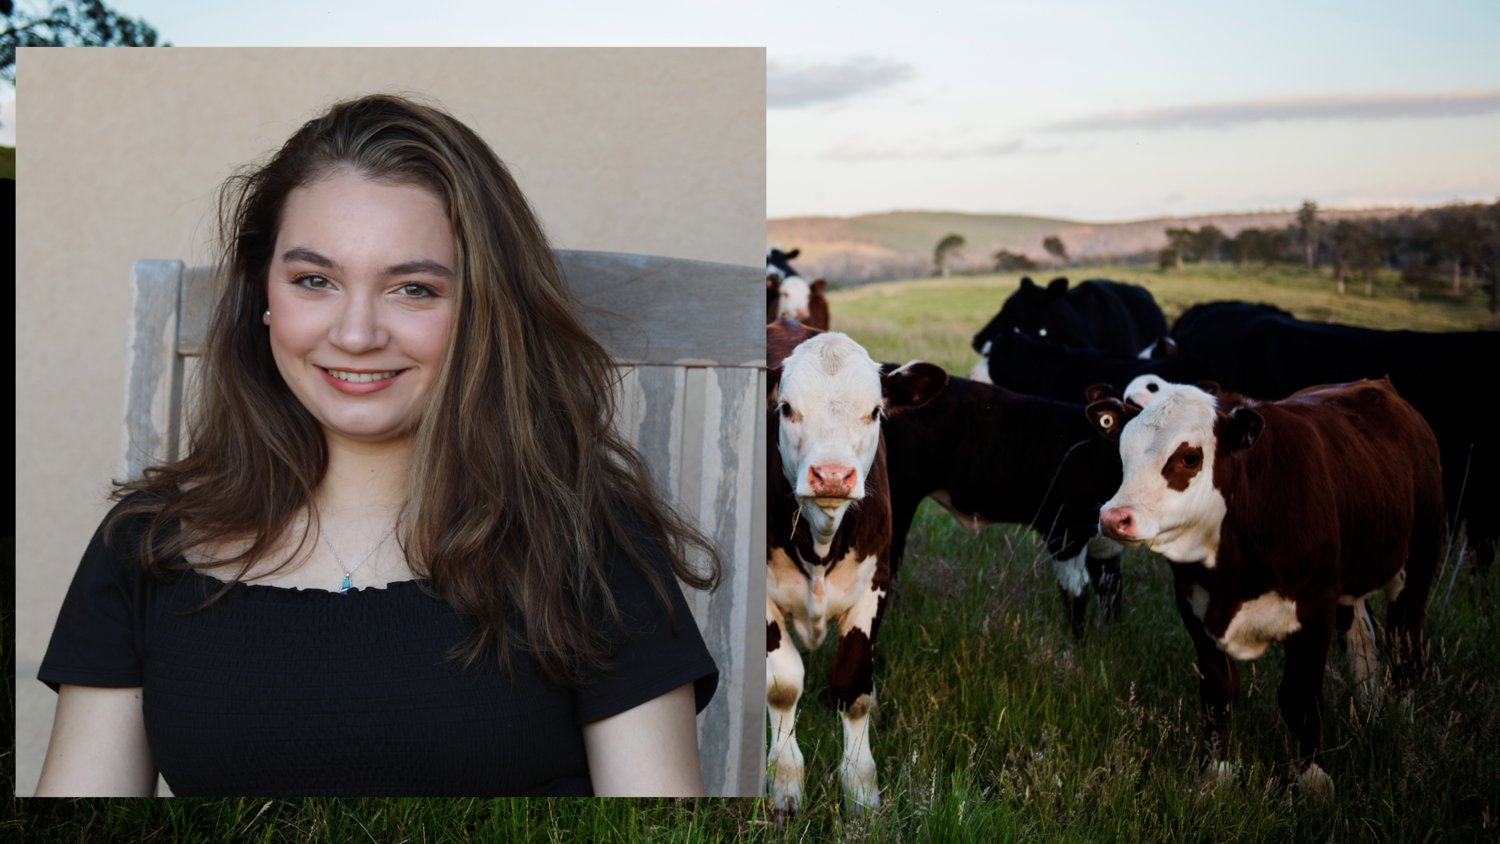 Waller County 4H participant Sarah McFarlane was awarded a $3,000 Will Looney Memorial scholarship for her hard work and success through the 4-H program.